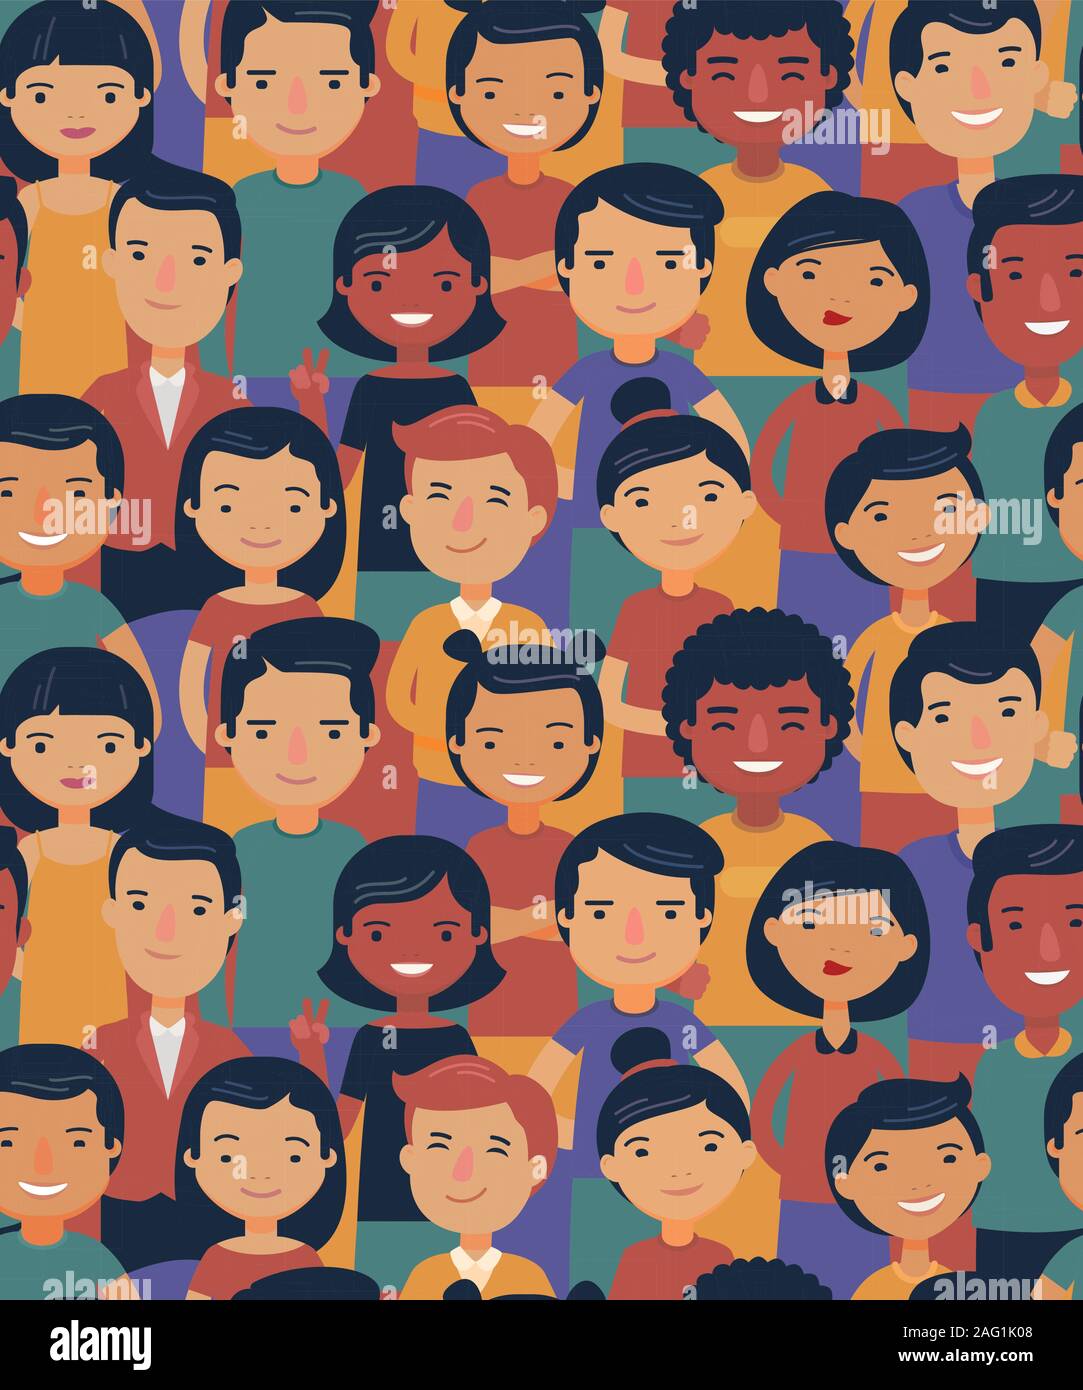 Crowd of people seamless background. Cartoon vector illustration Stock Vector